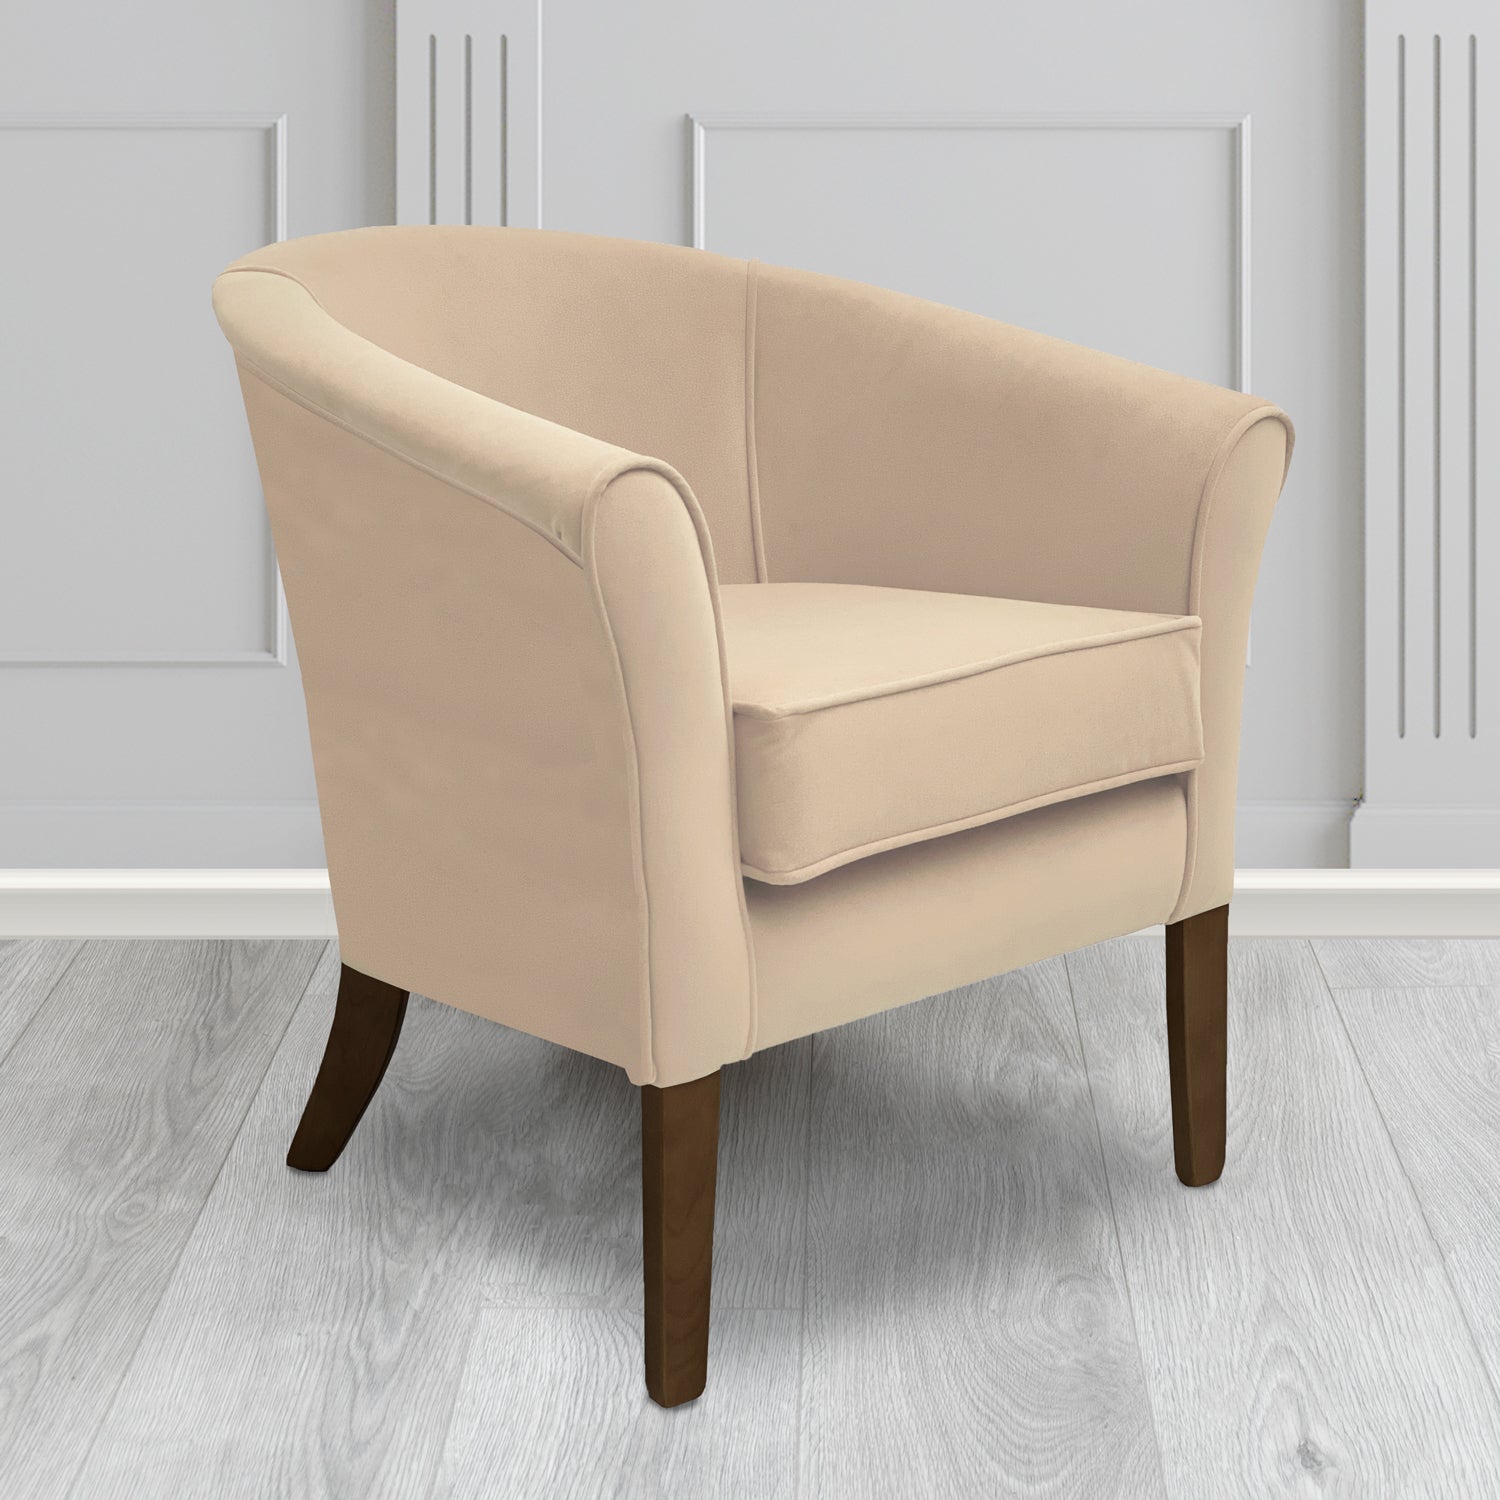 Aspen Tub Chair in Noble 837 Stone Crib 5 Velvet Fabric - Water Resistant - The Tub Chair Shop